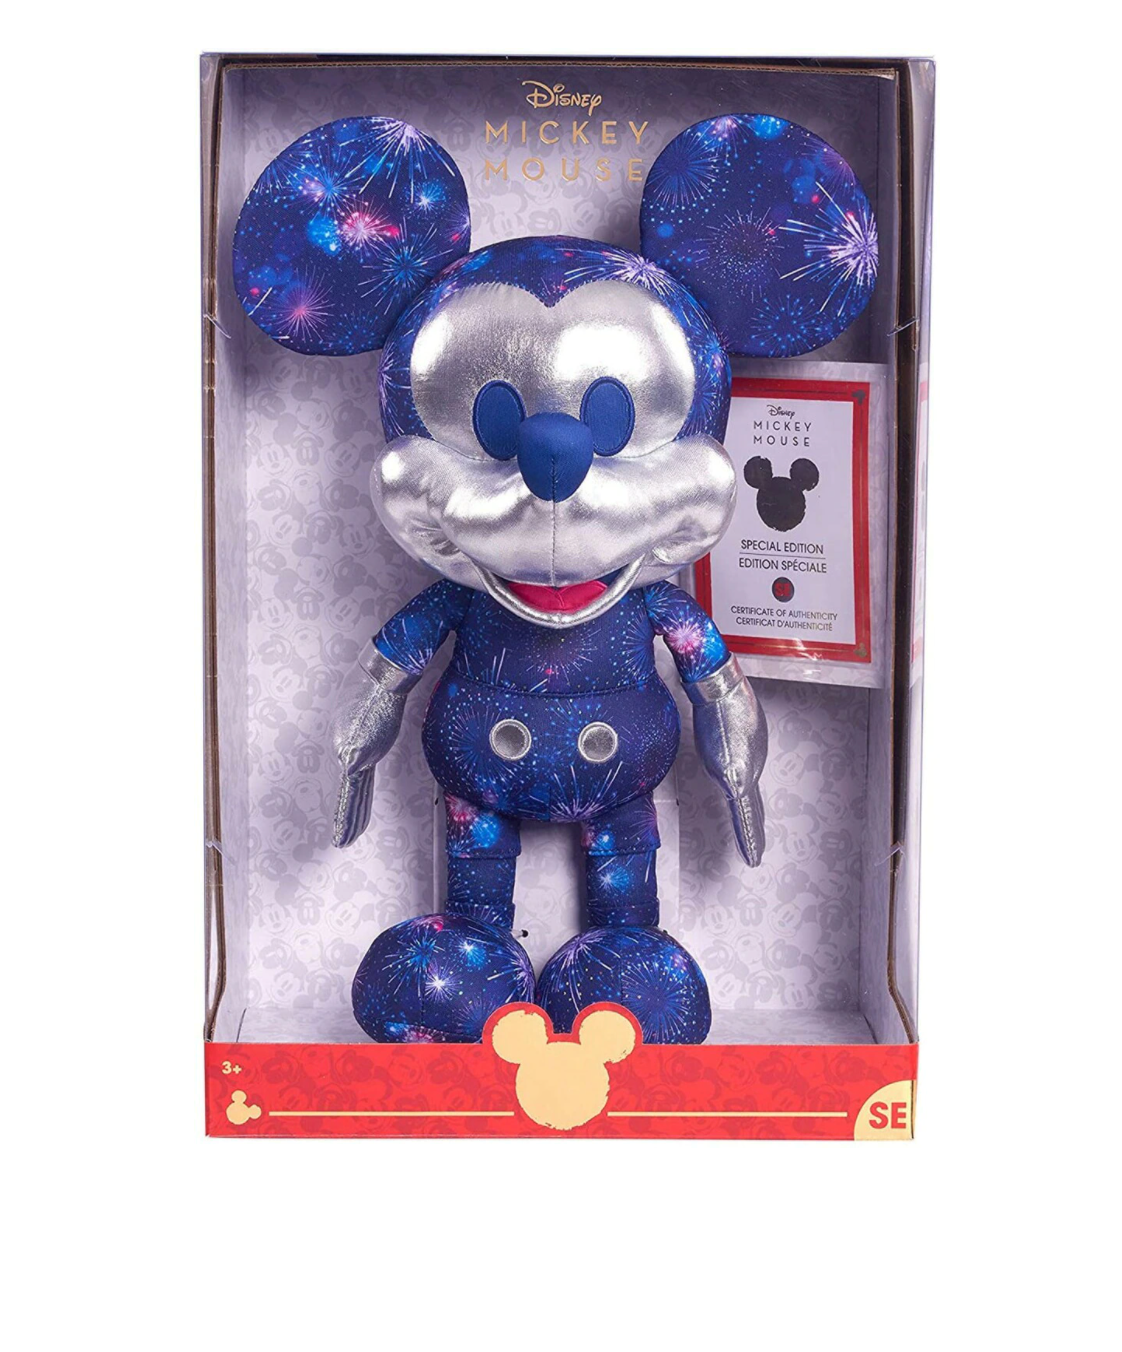 Disney Year of the Mickey Fantasy in the Sky Plush Exclusive Amazon New with Box